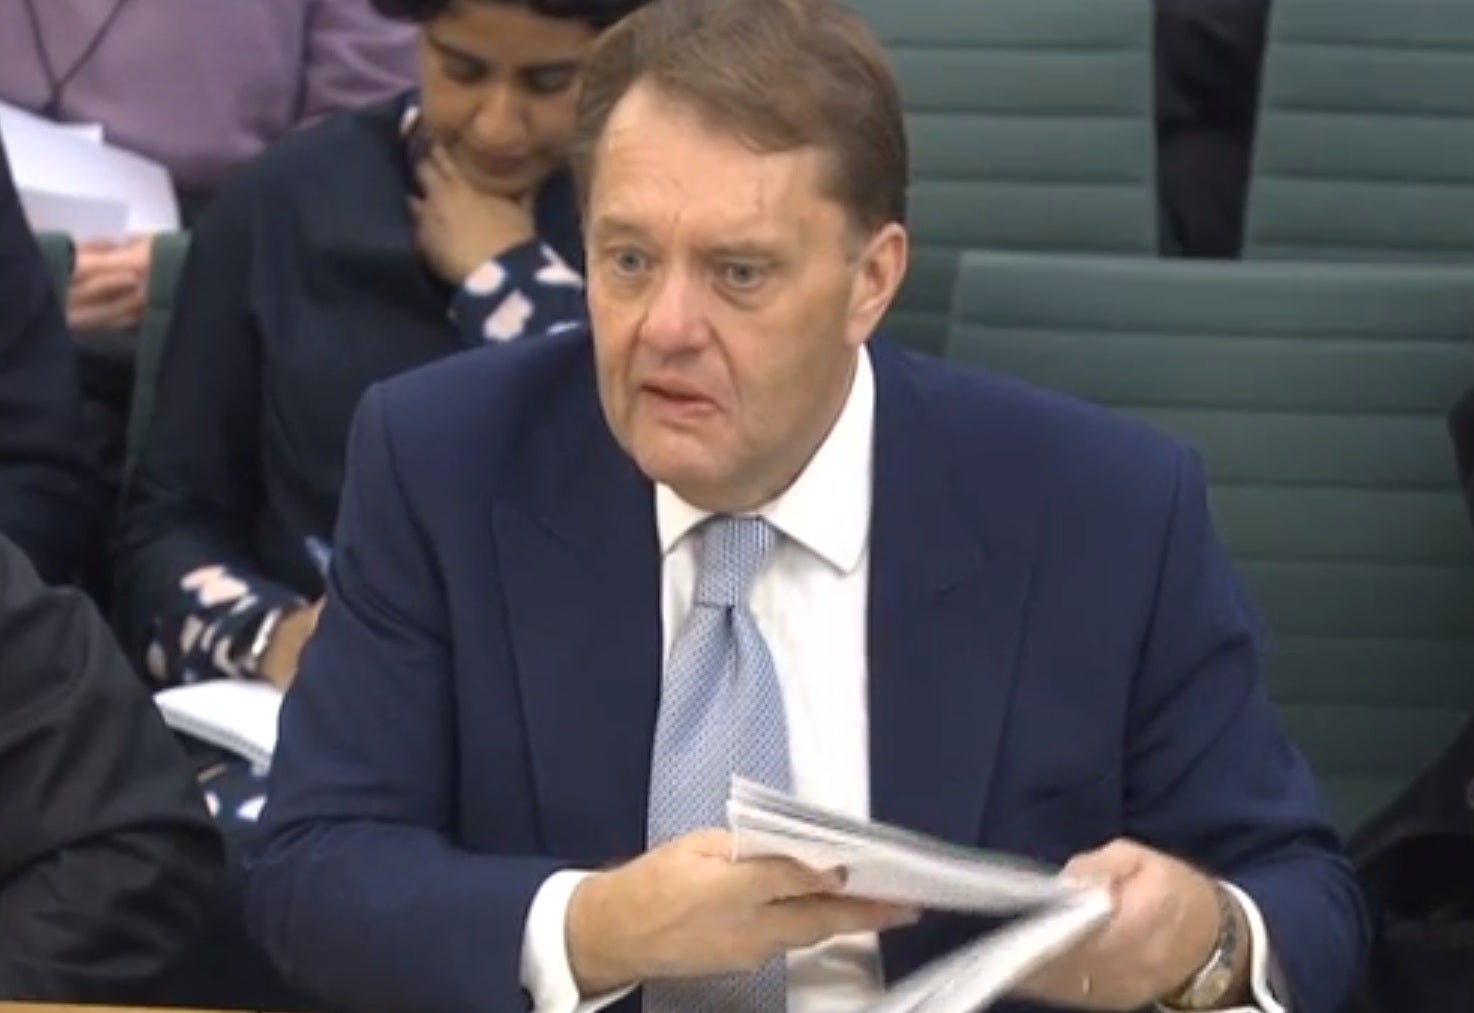 John Hayes, security minister at the Home Office